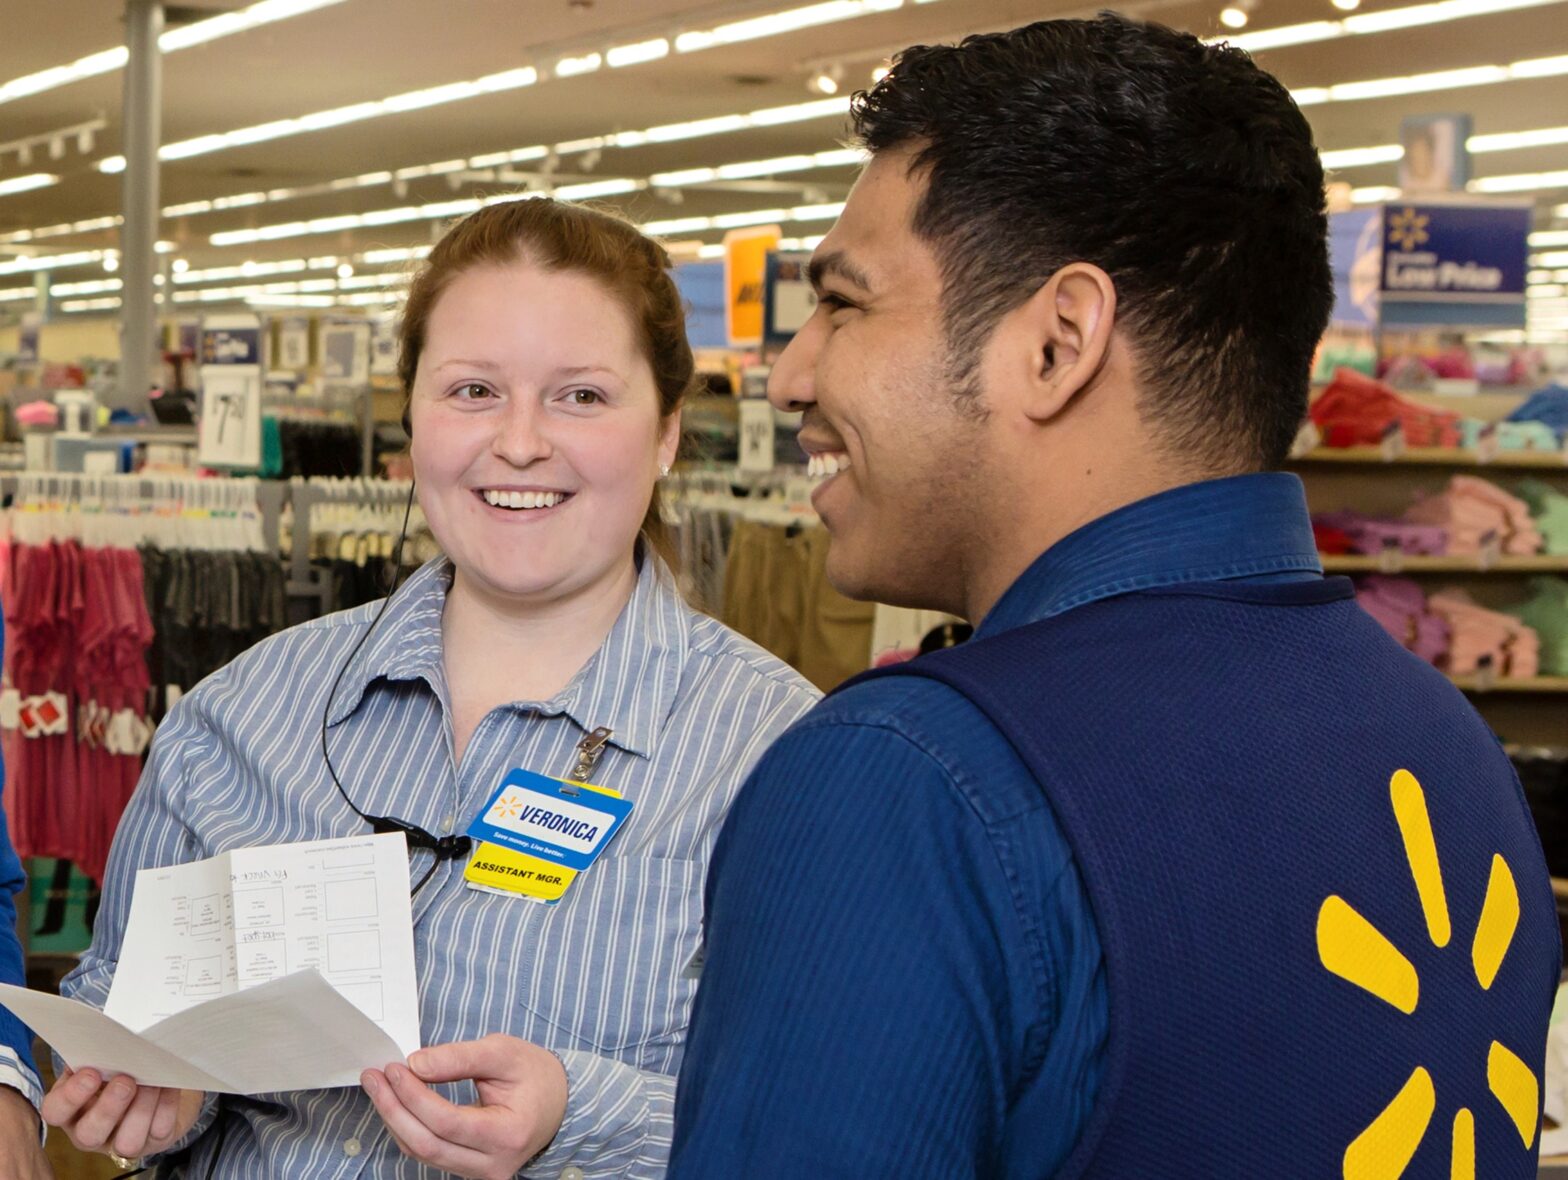 What has Walmart learned from HR analytics?